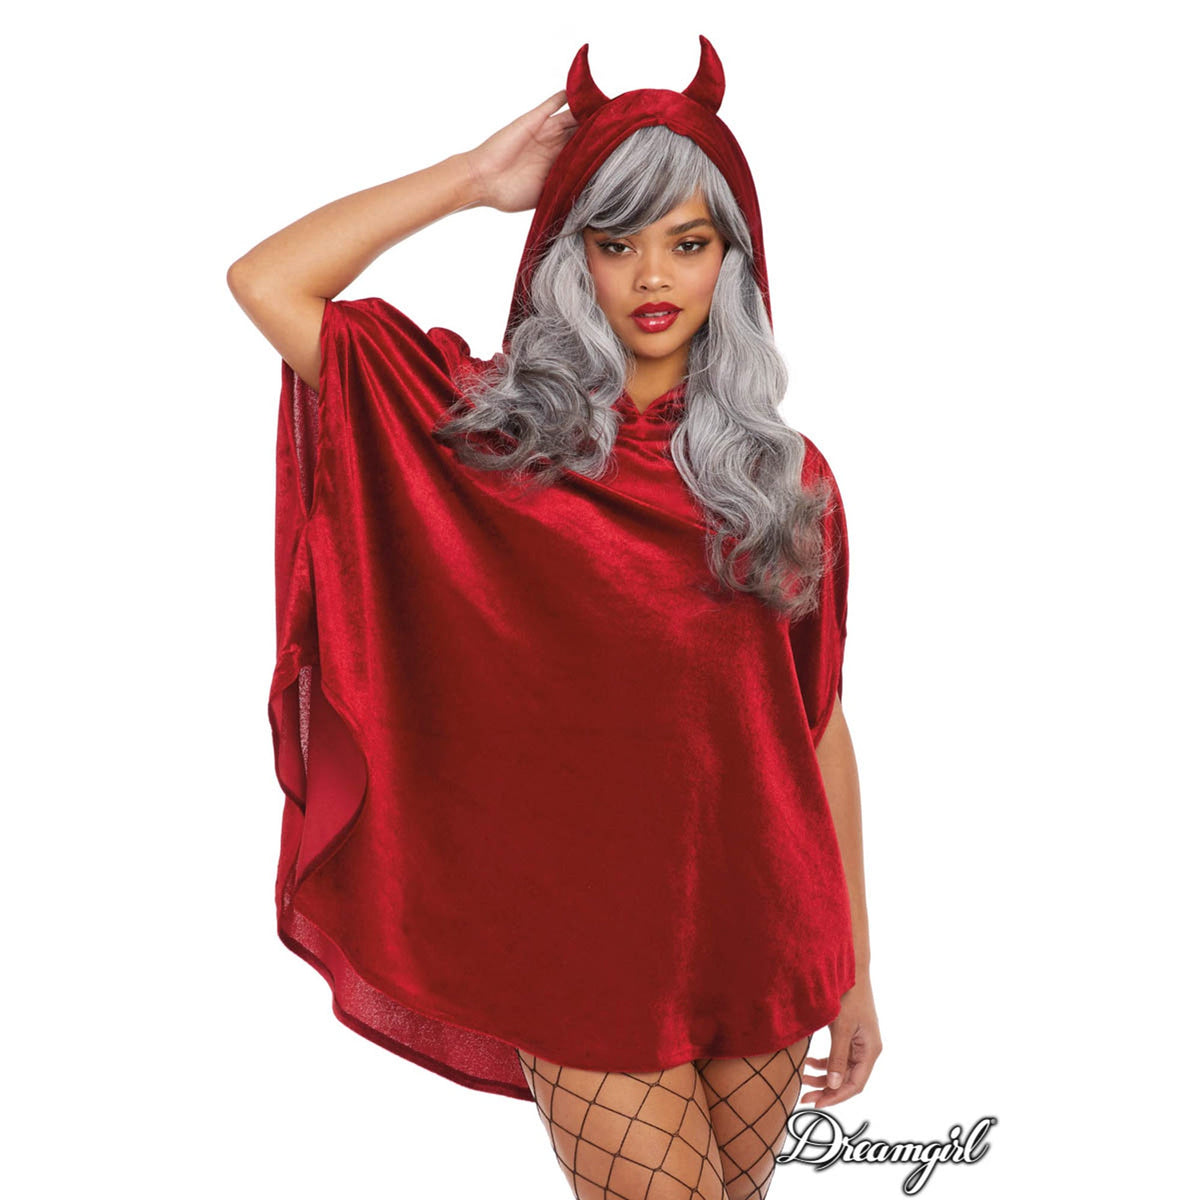 IMPORTATIONS JOLARSPECK INC Costume Accessories Devil poncho for Adults 888368309726